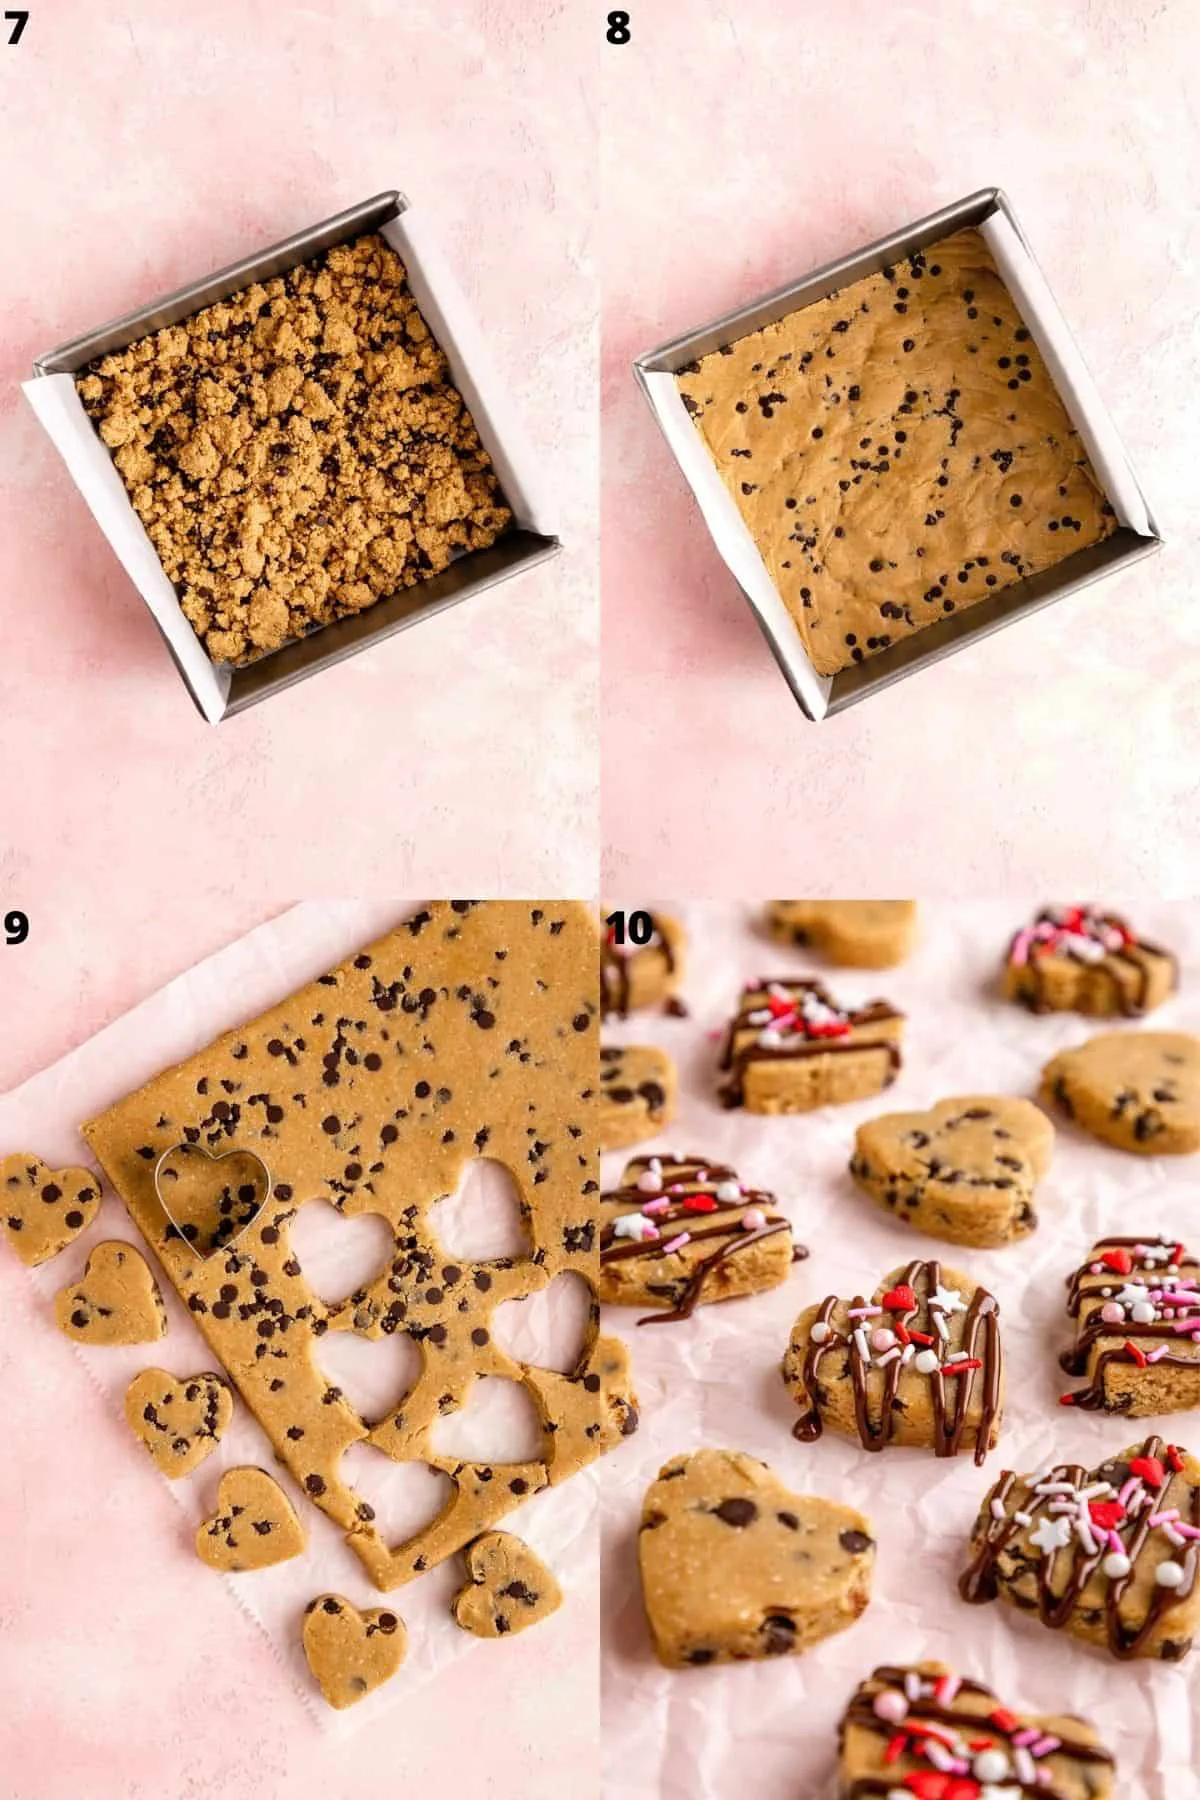 Gourmet Valentine's Day gift to make yourself homemade chocolate chip cookies